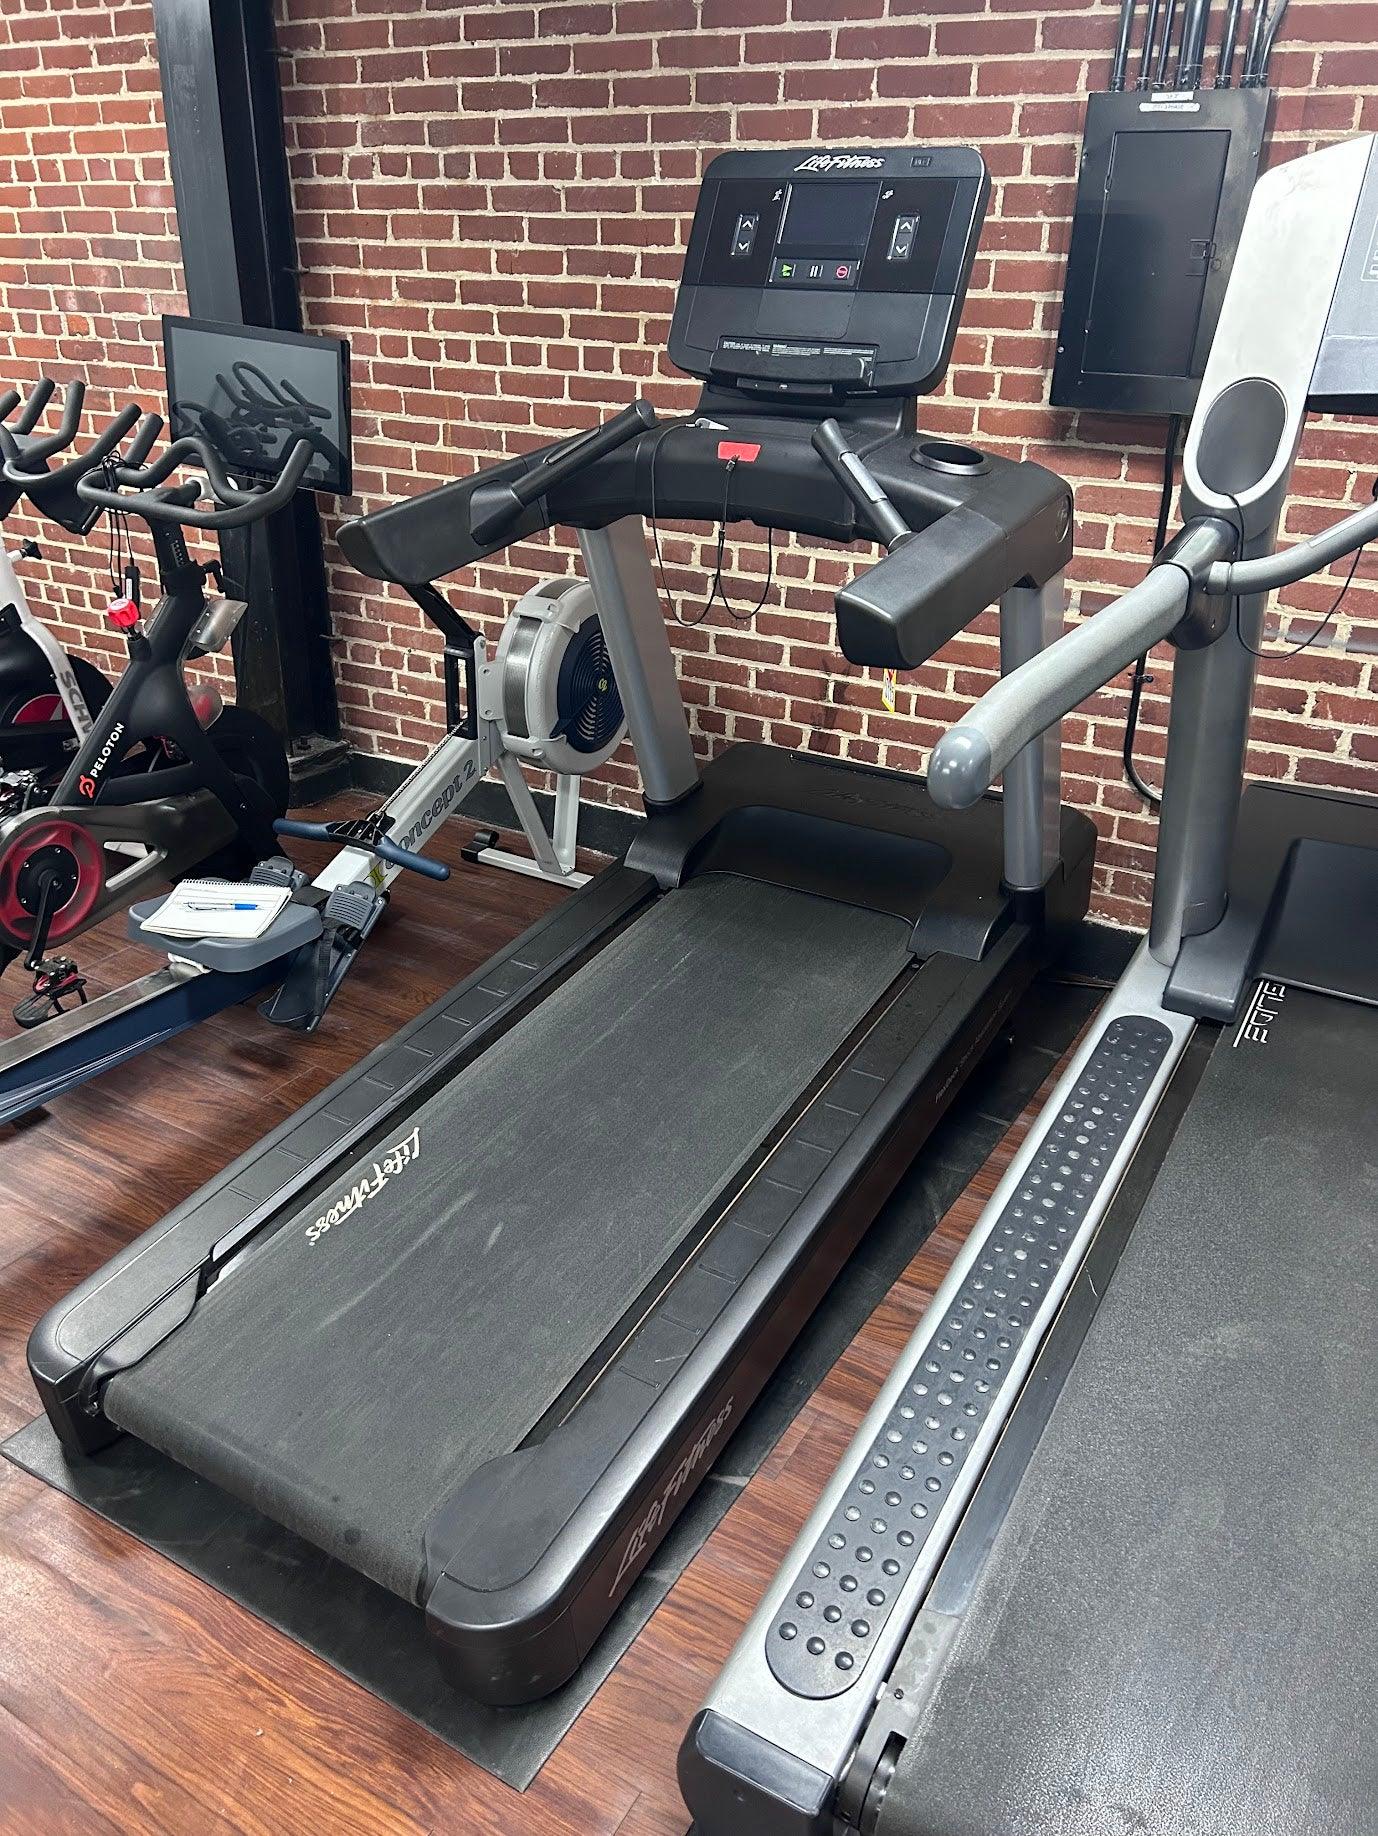 Pre-Owned Life Fitness Club Series Touchscreen Treadmill - ExerciseUnlimited